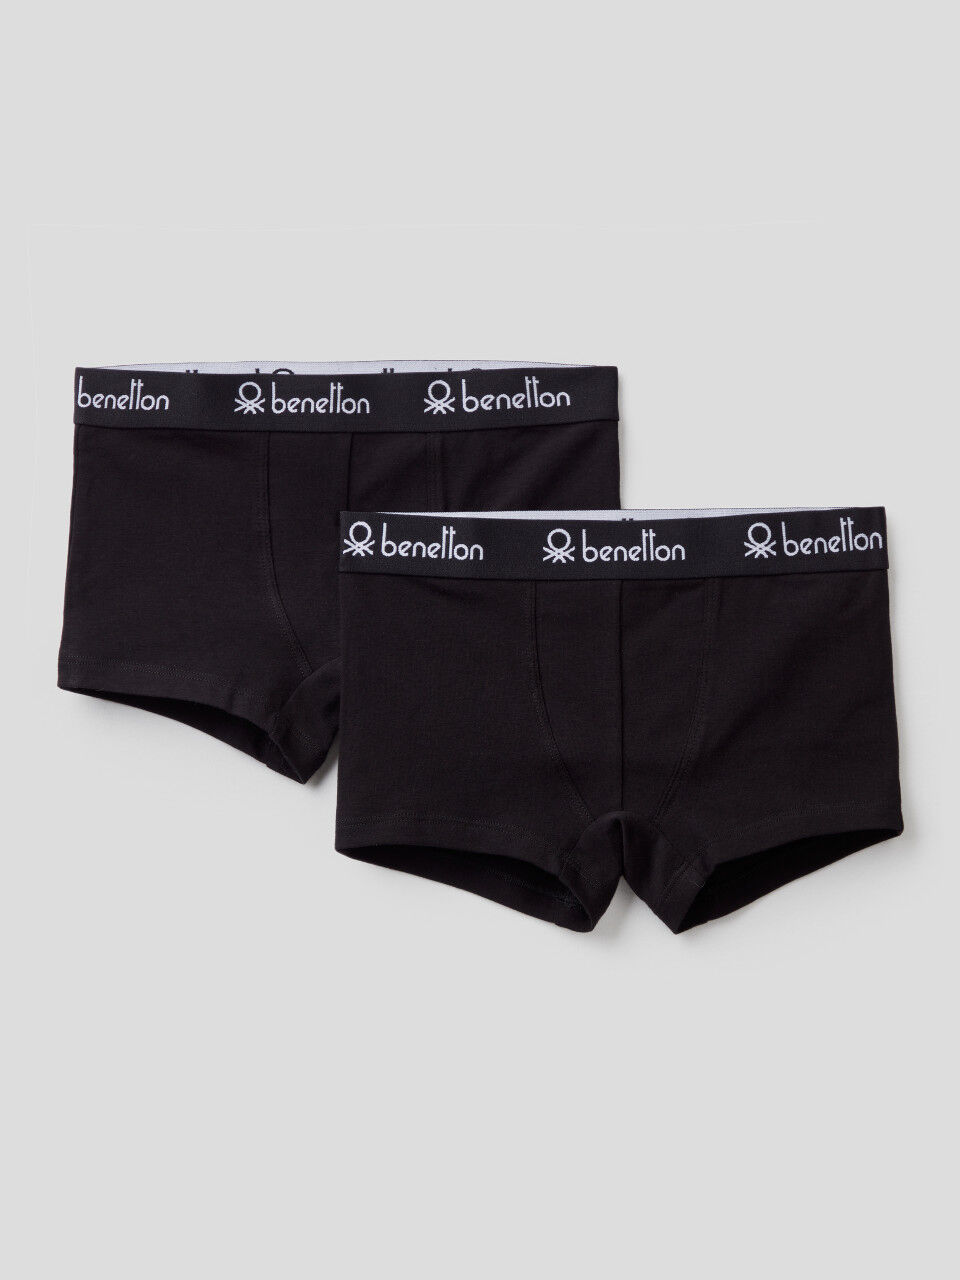 Two black boxers with logoed elastic